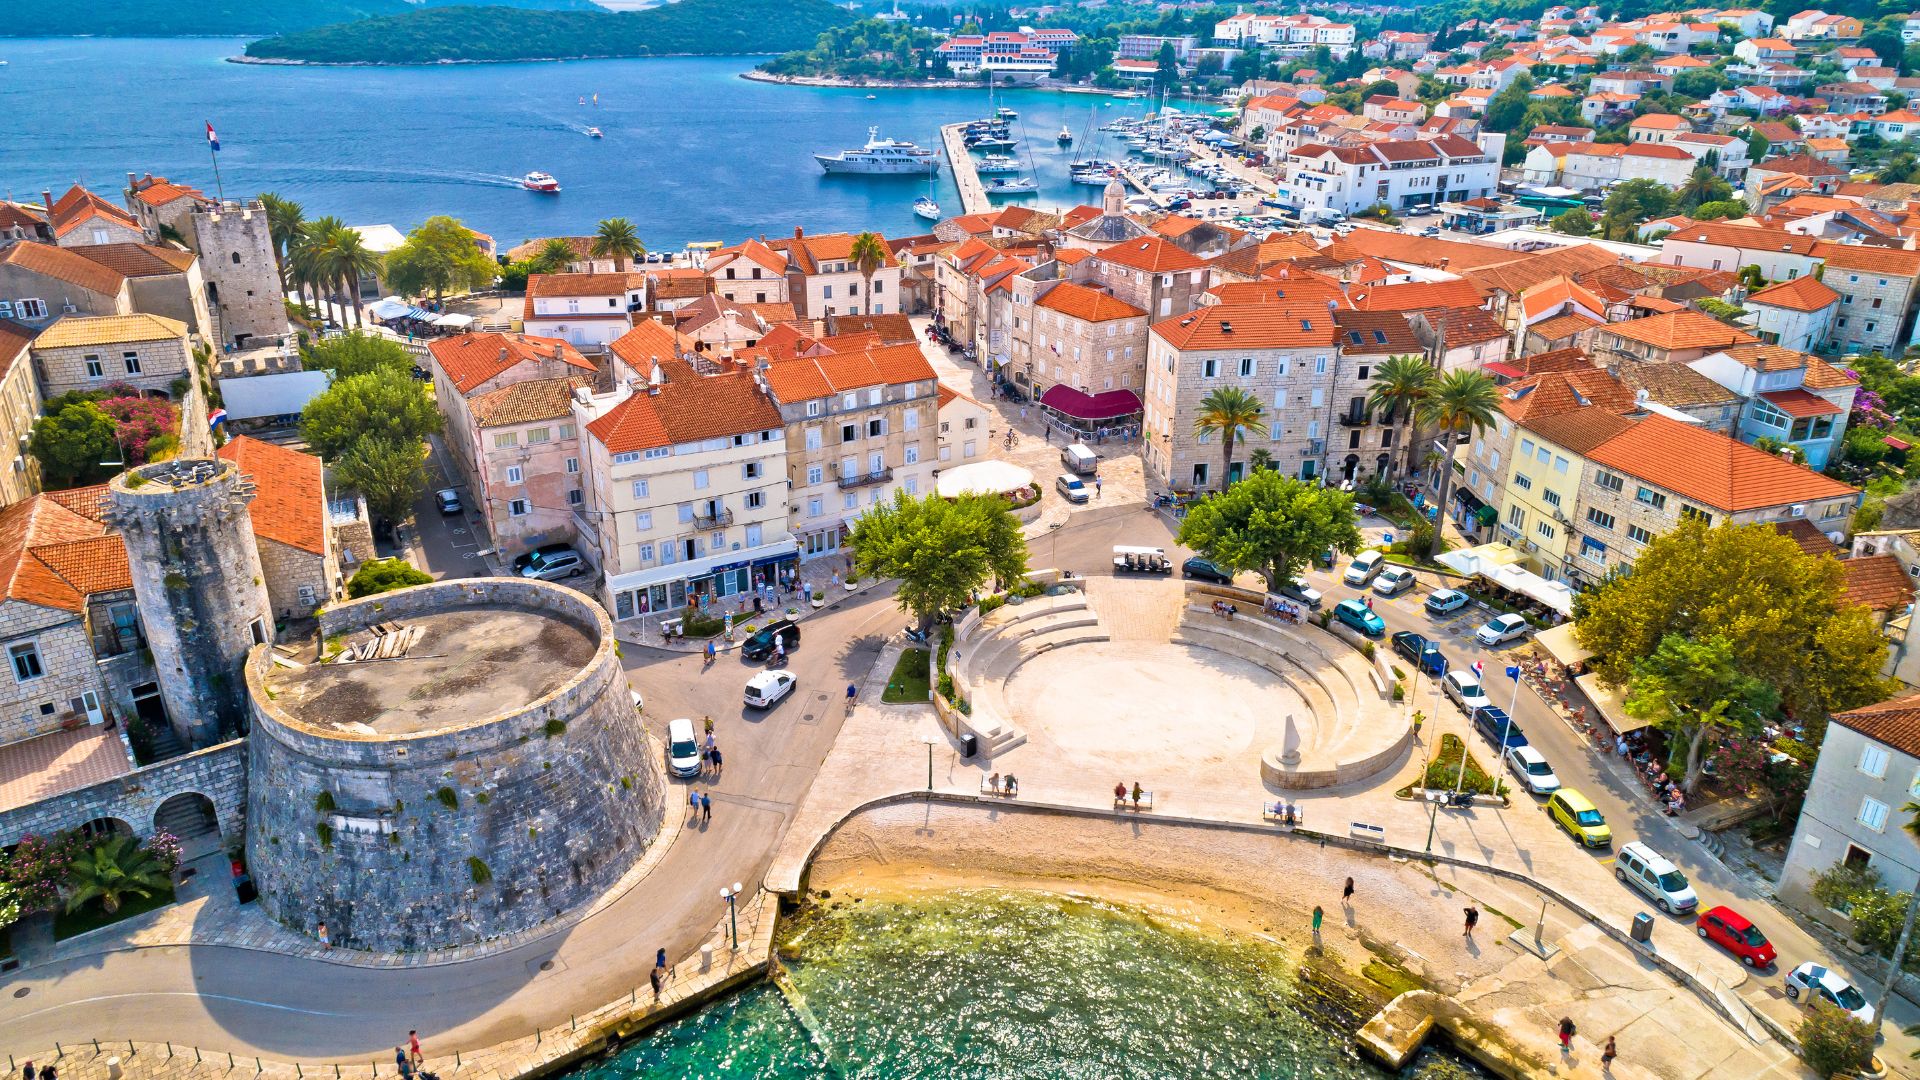 Korčula: Marco Polo’s Alleged Birthplace and Adriatic Oasis | Serbia Visit